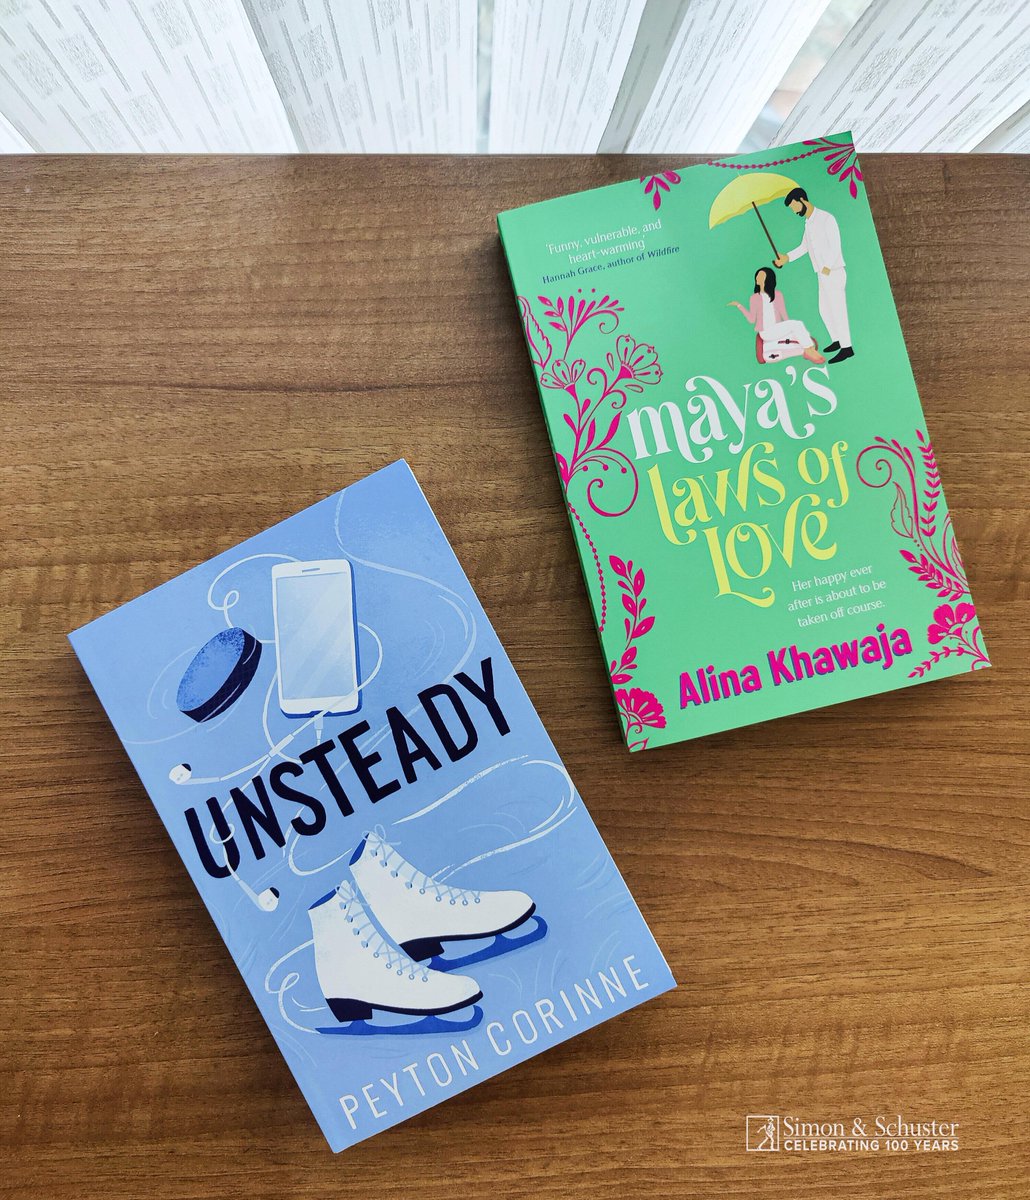 The final copies have arrived at the office! They will be released soon. How excited are you!

Unsteady - 25th April
Maya's Laws of Love - 28th April

#romancebooks #mayaslawoflove #unsteady #romancetrope #romancefiction #bookstagram #bookstagramindia #sportsromance